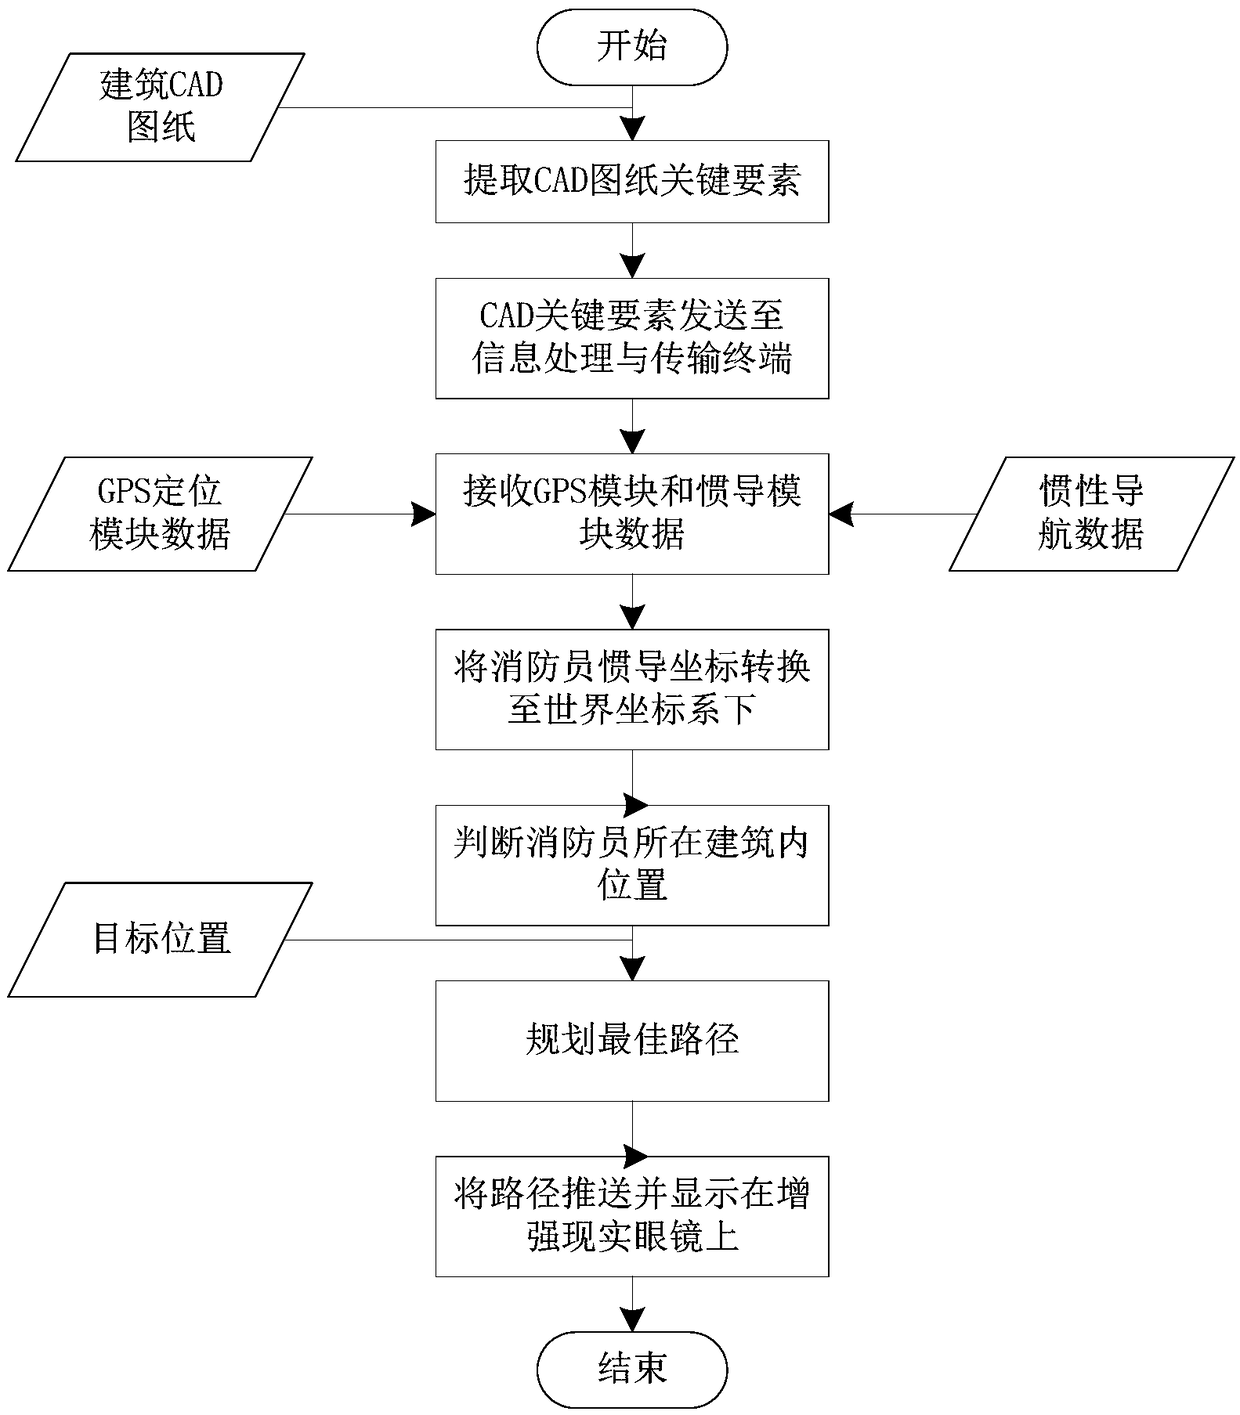 Indoor positioning and path planning method for fire extinguishing rescue condition